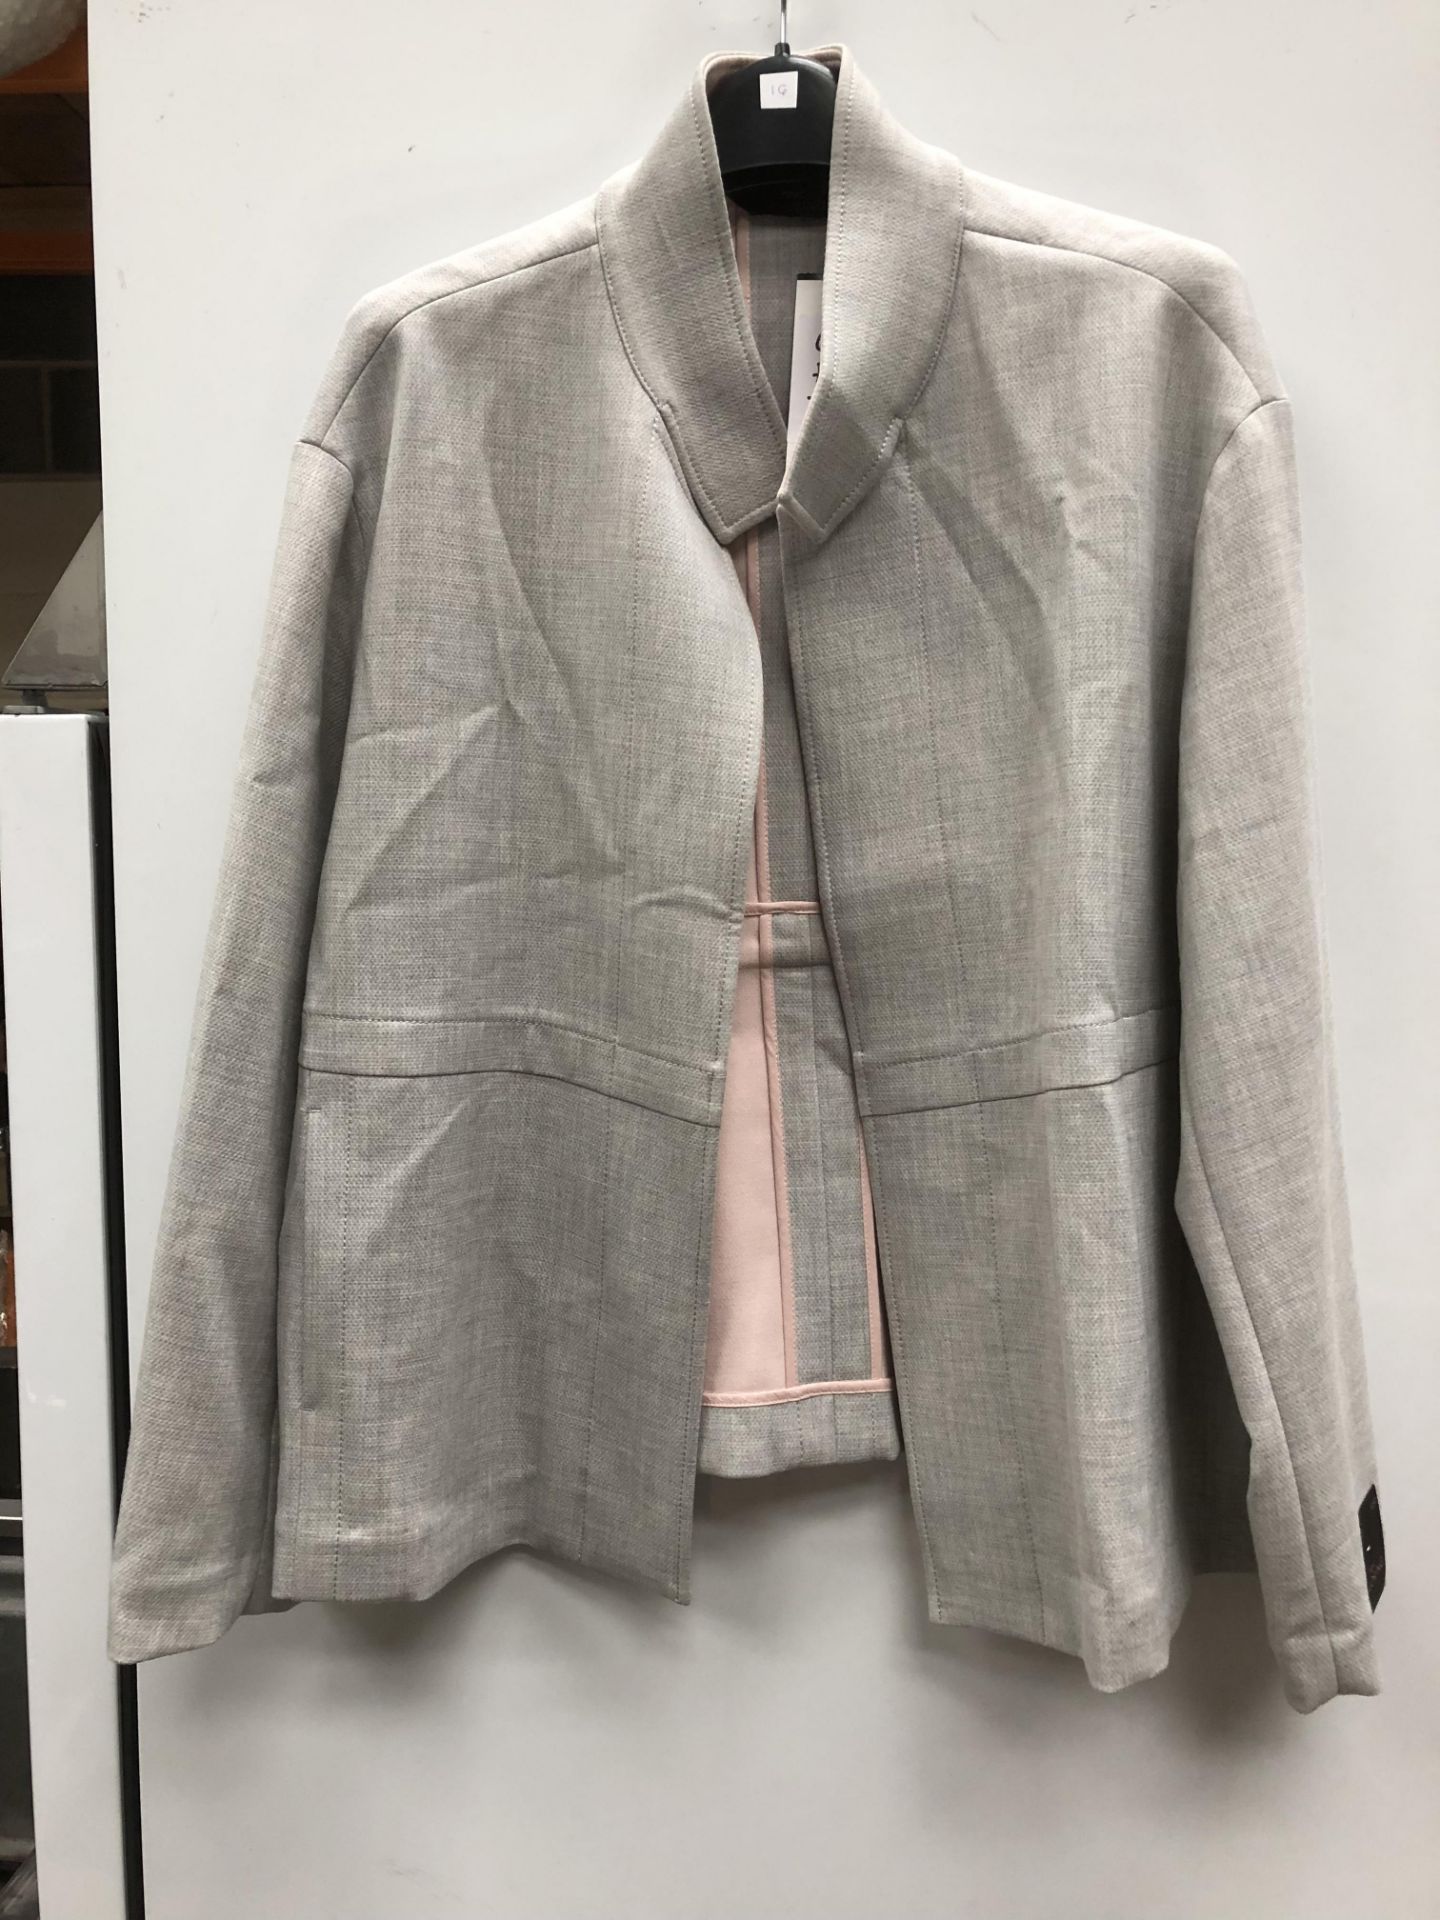 Next Taylored Jacket, Grey with Pink Lining, Size 18 New with Tags